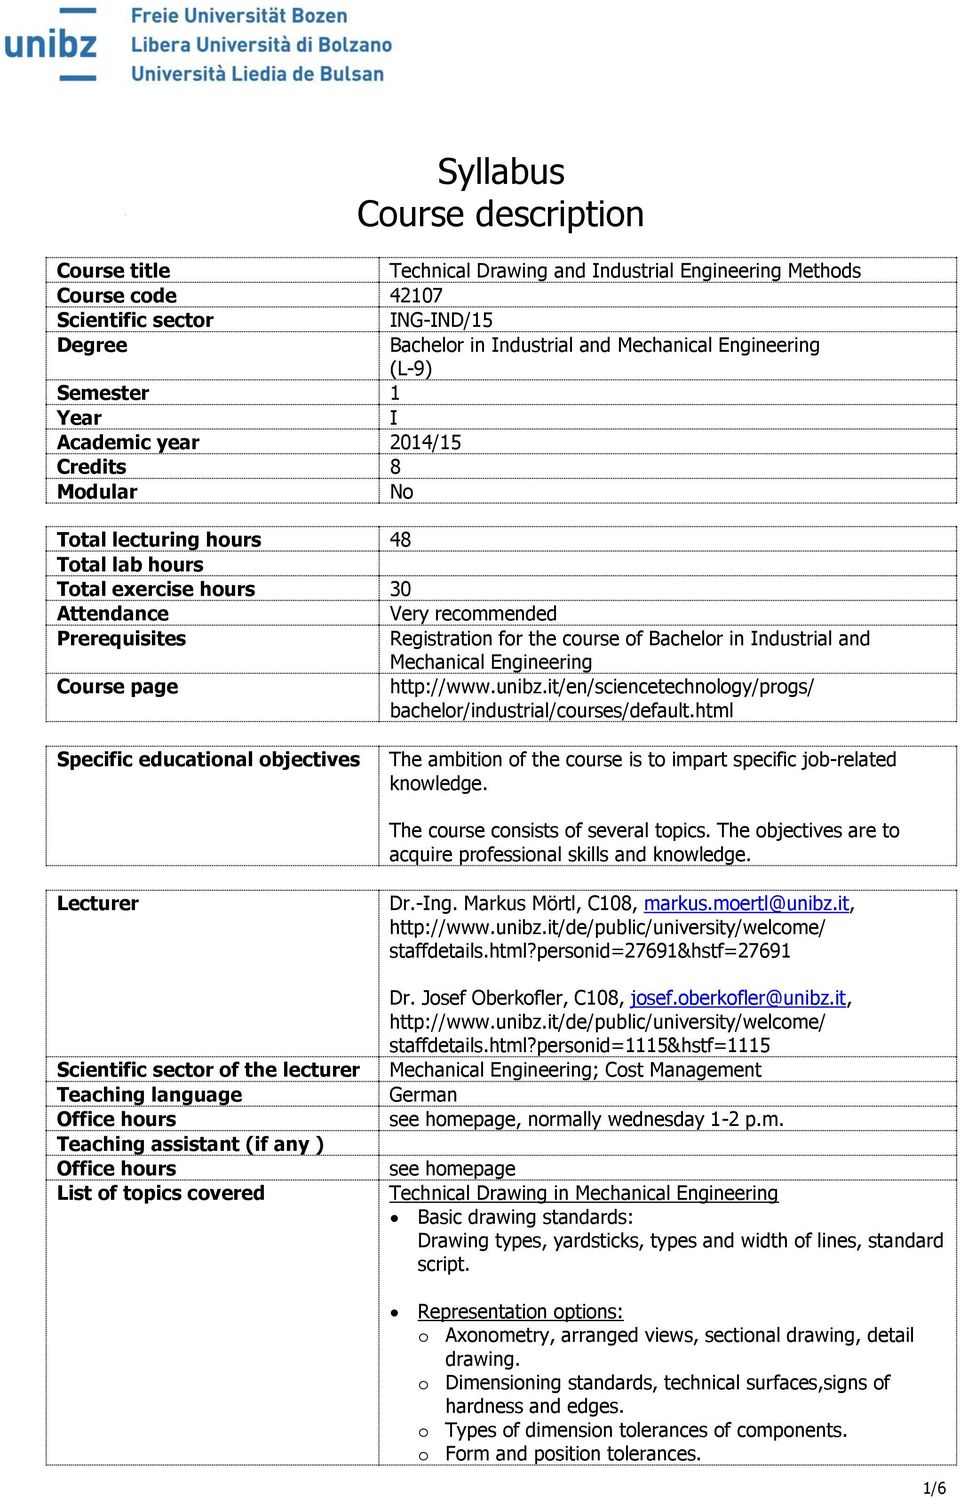 course of Bachelor in Industrial and Mechanical Engineering Course page http://www.unibz.it/en/sciencetechnology/progs/ bachelor/industrial/courses/default.